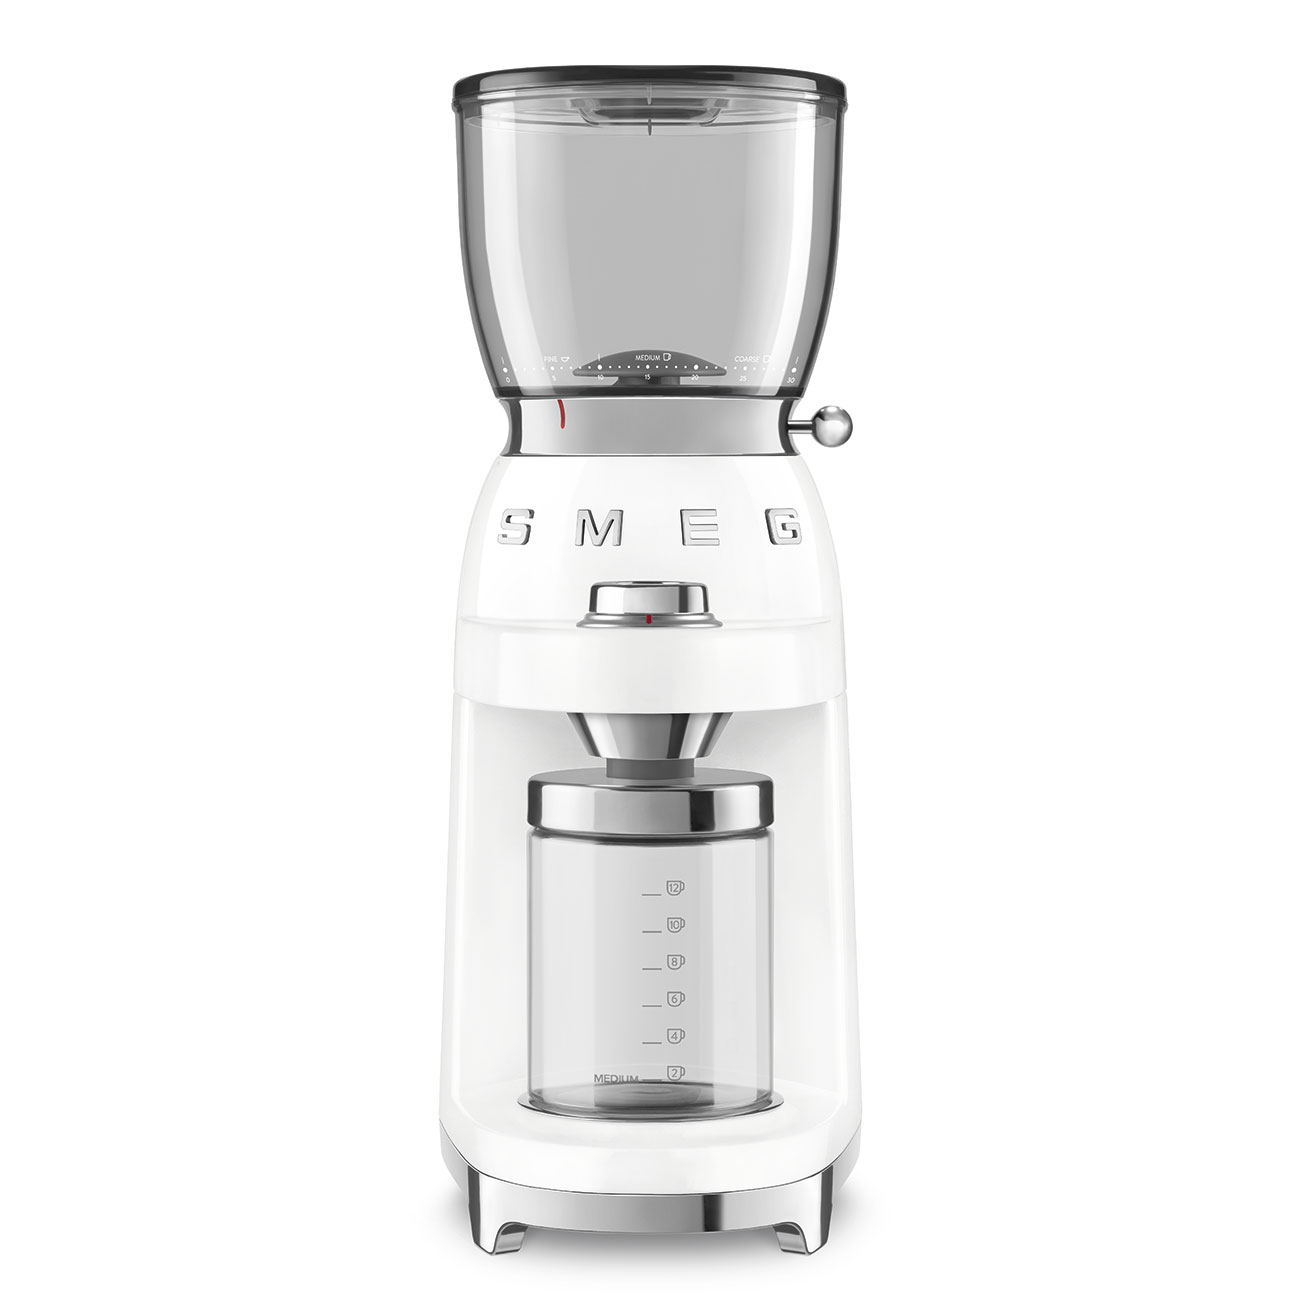 White Coffee Grinder featuring a conical burr - CGF11WHUK - Smeg_1